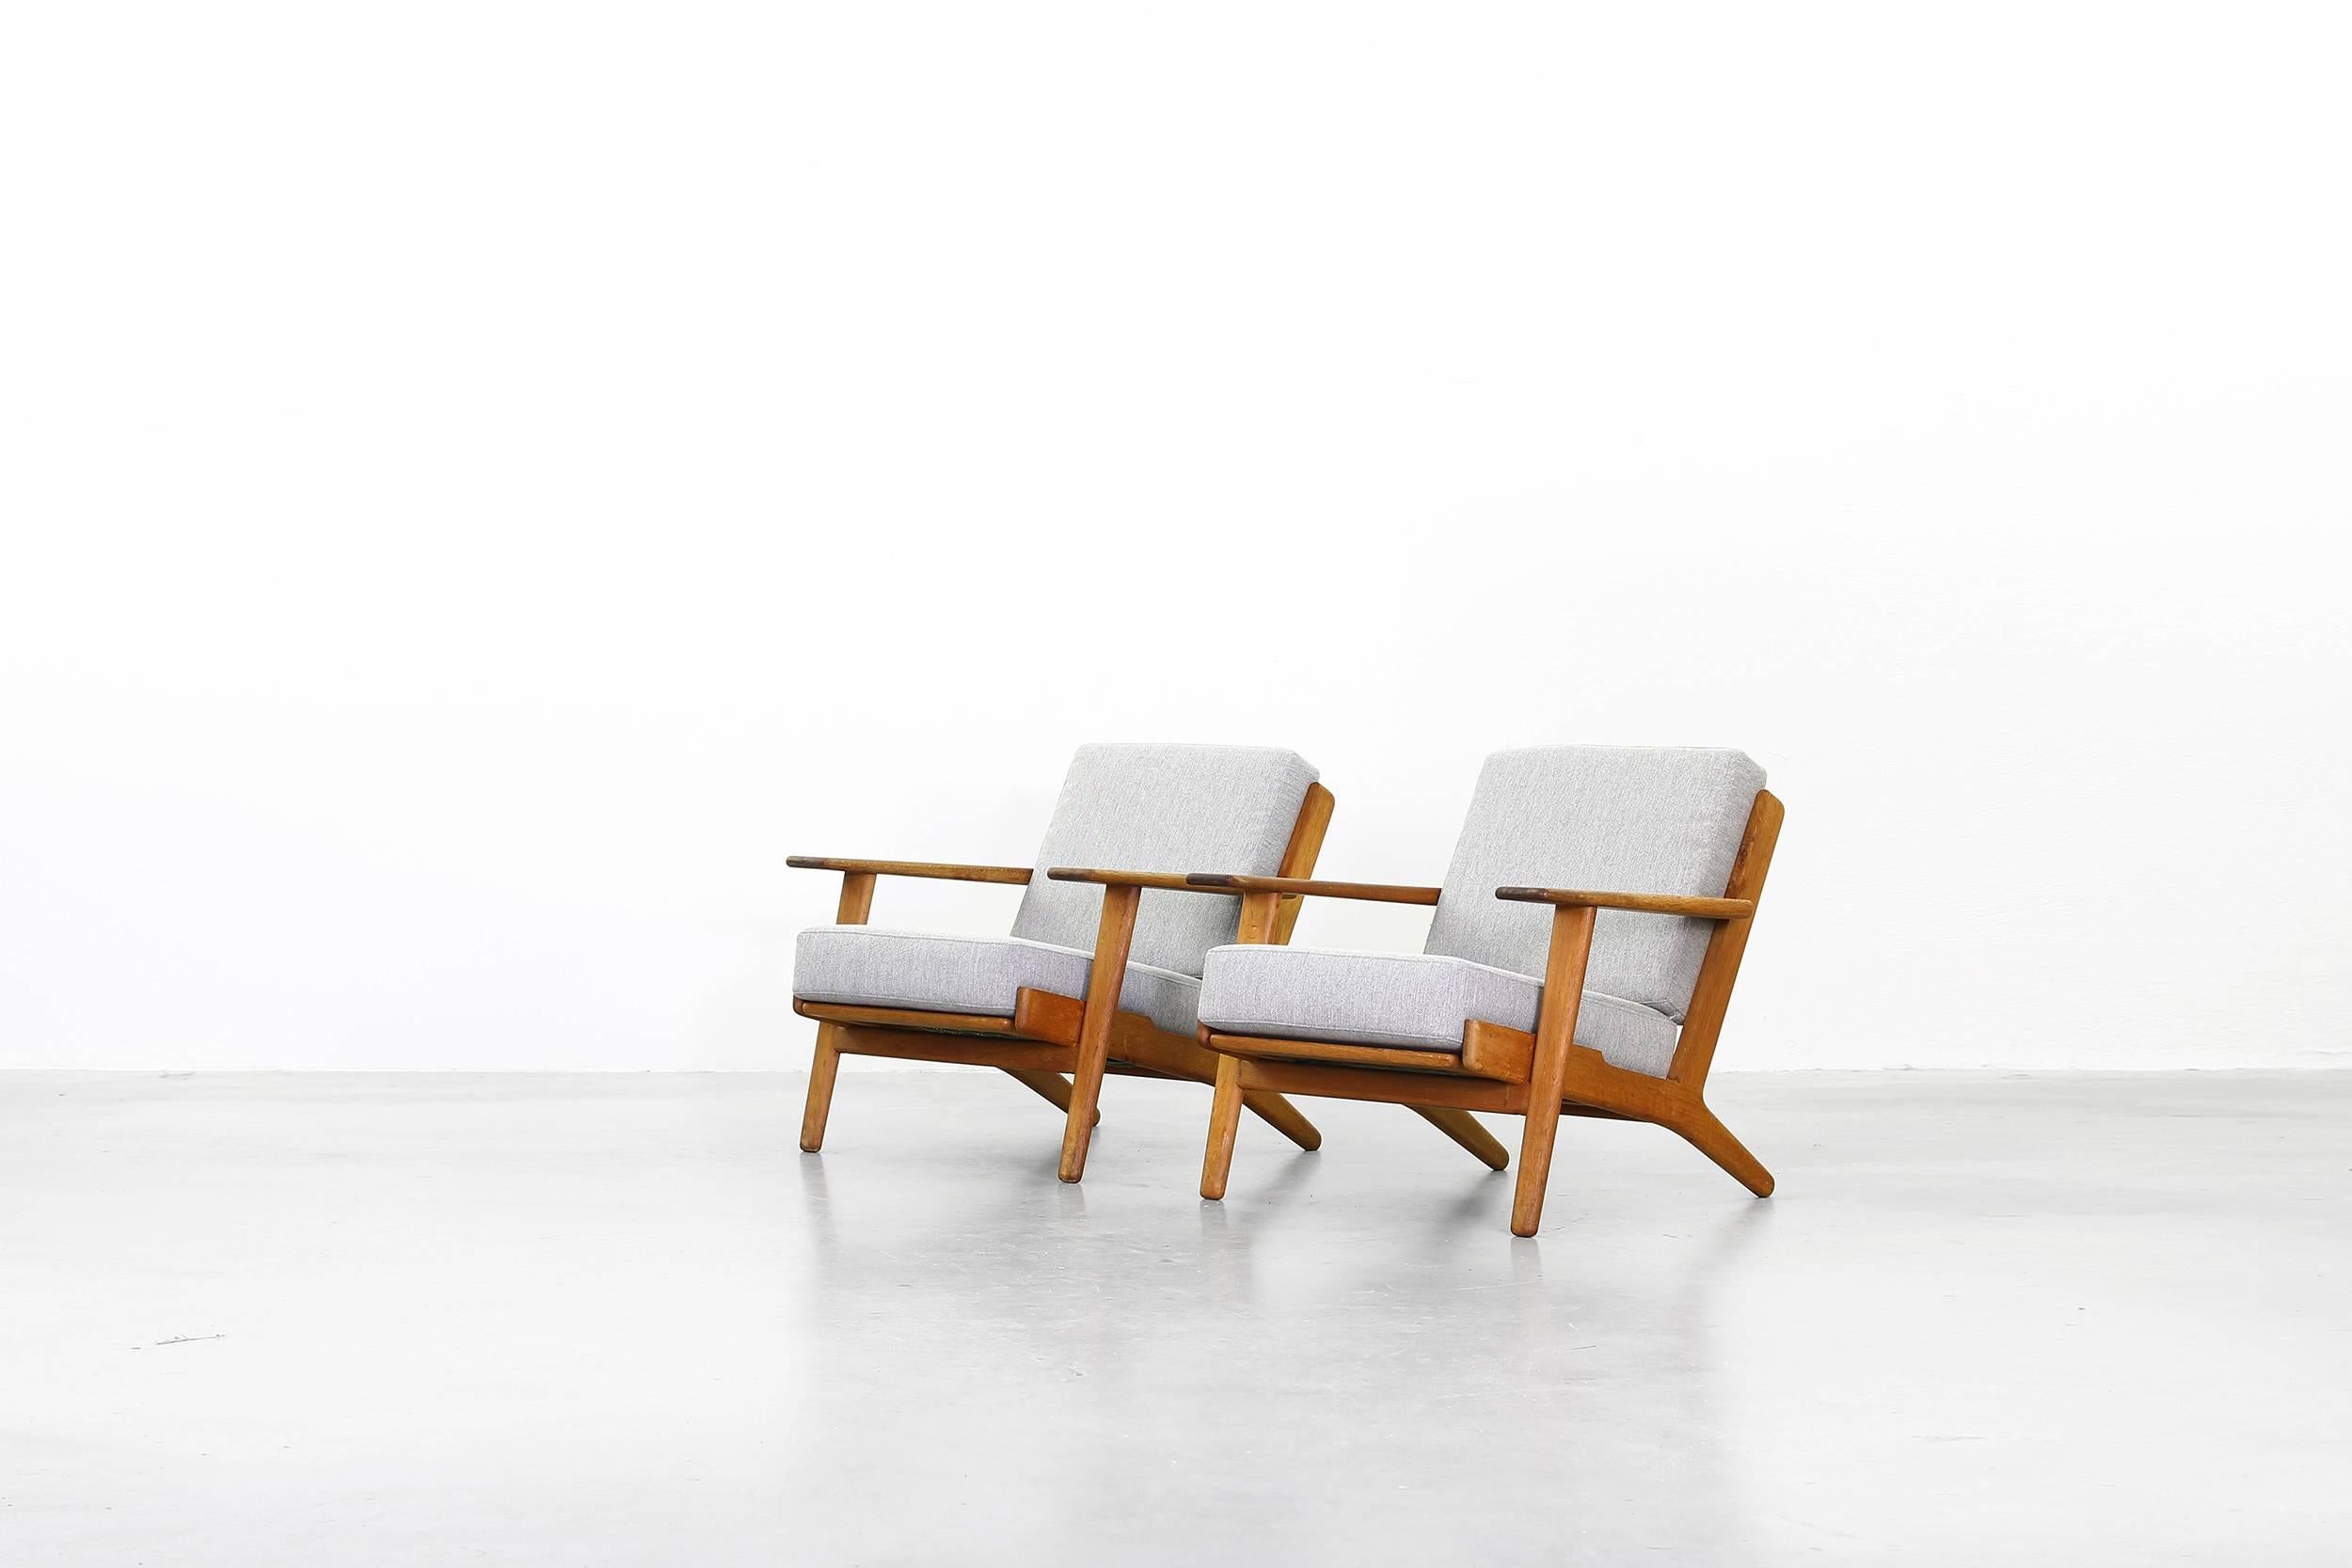 20th Century Pair of Lounge Chairs by Hans J. Wegner for GETAMA